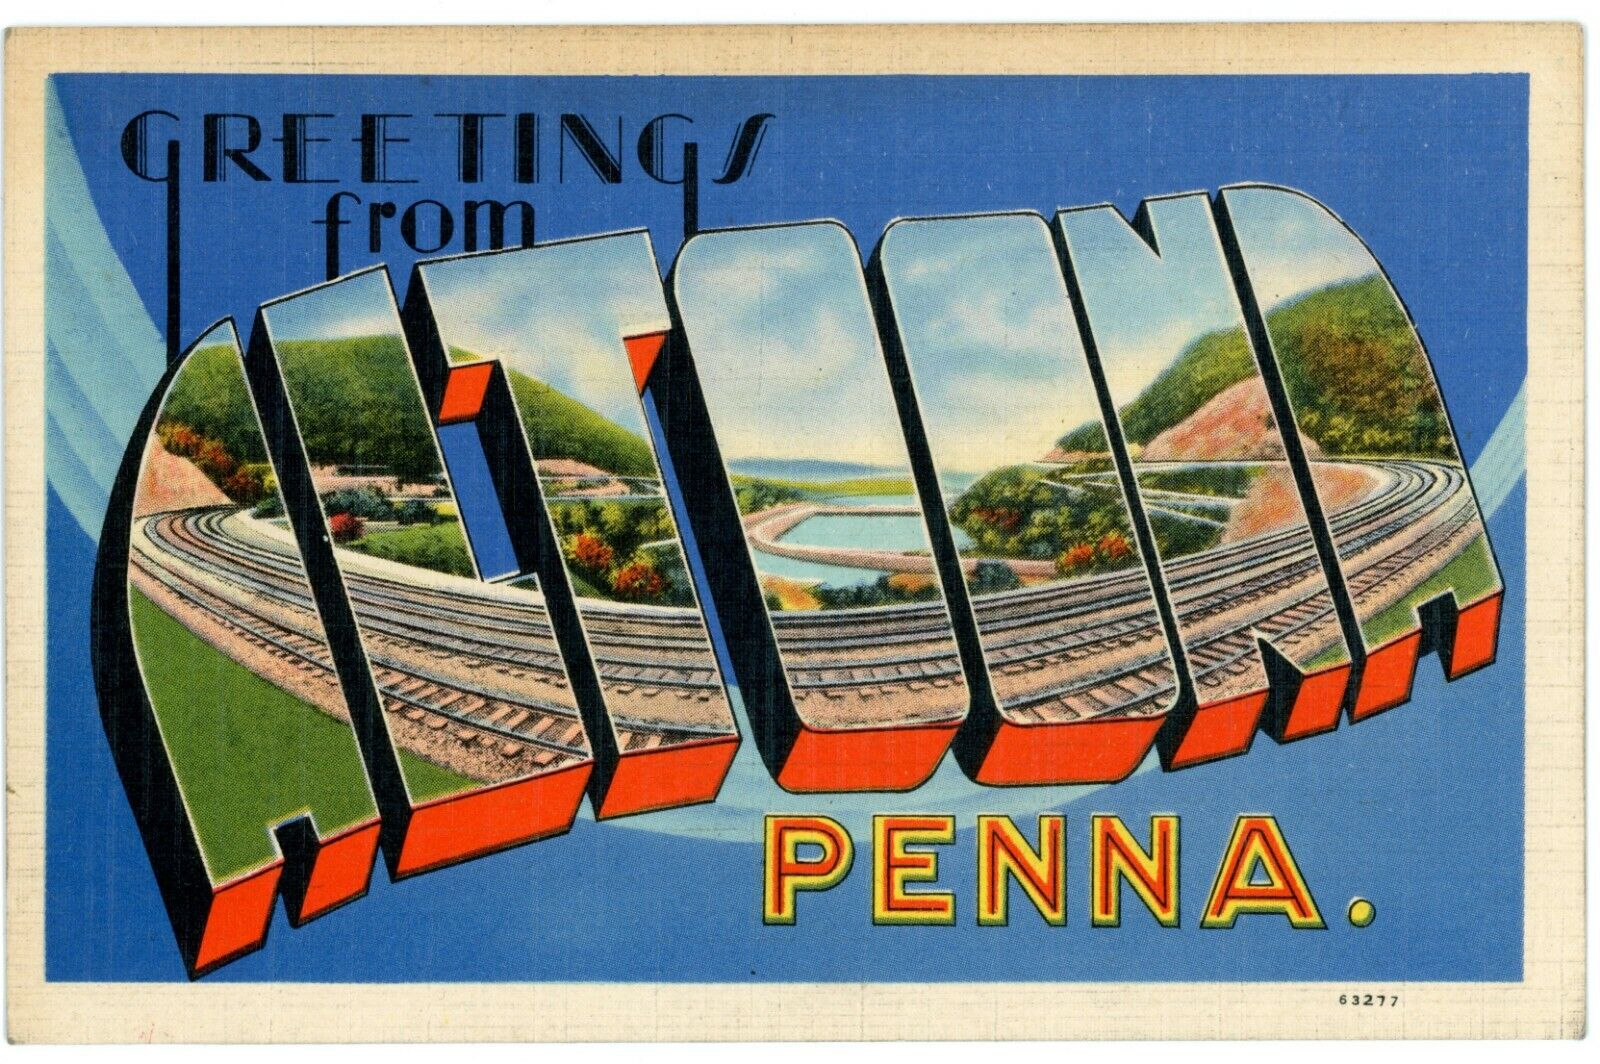 Large Letter Greetings from Altoona Pa Pennsylvania Postcard